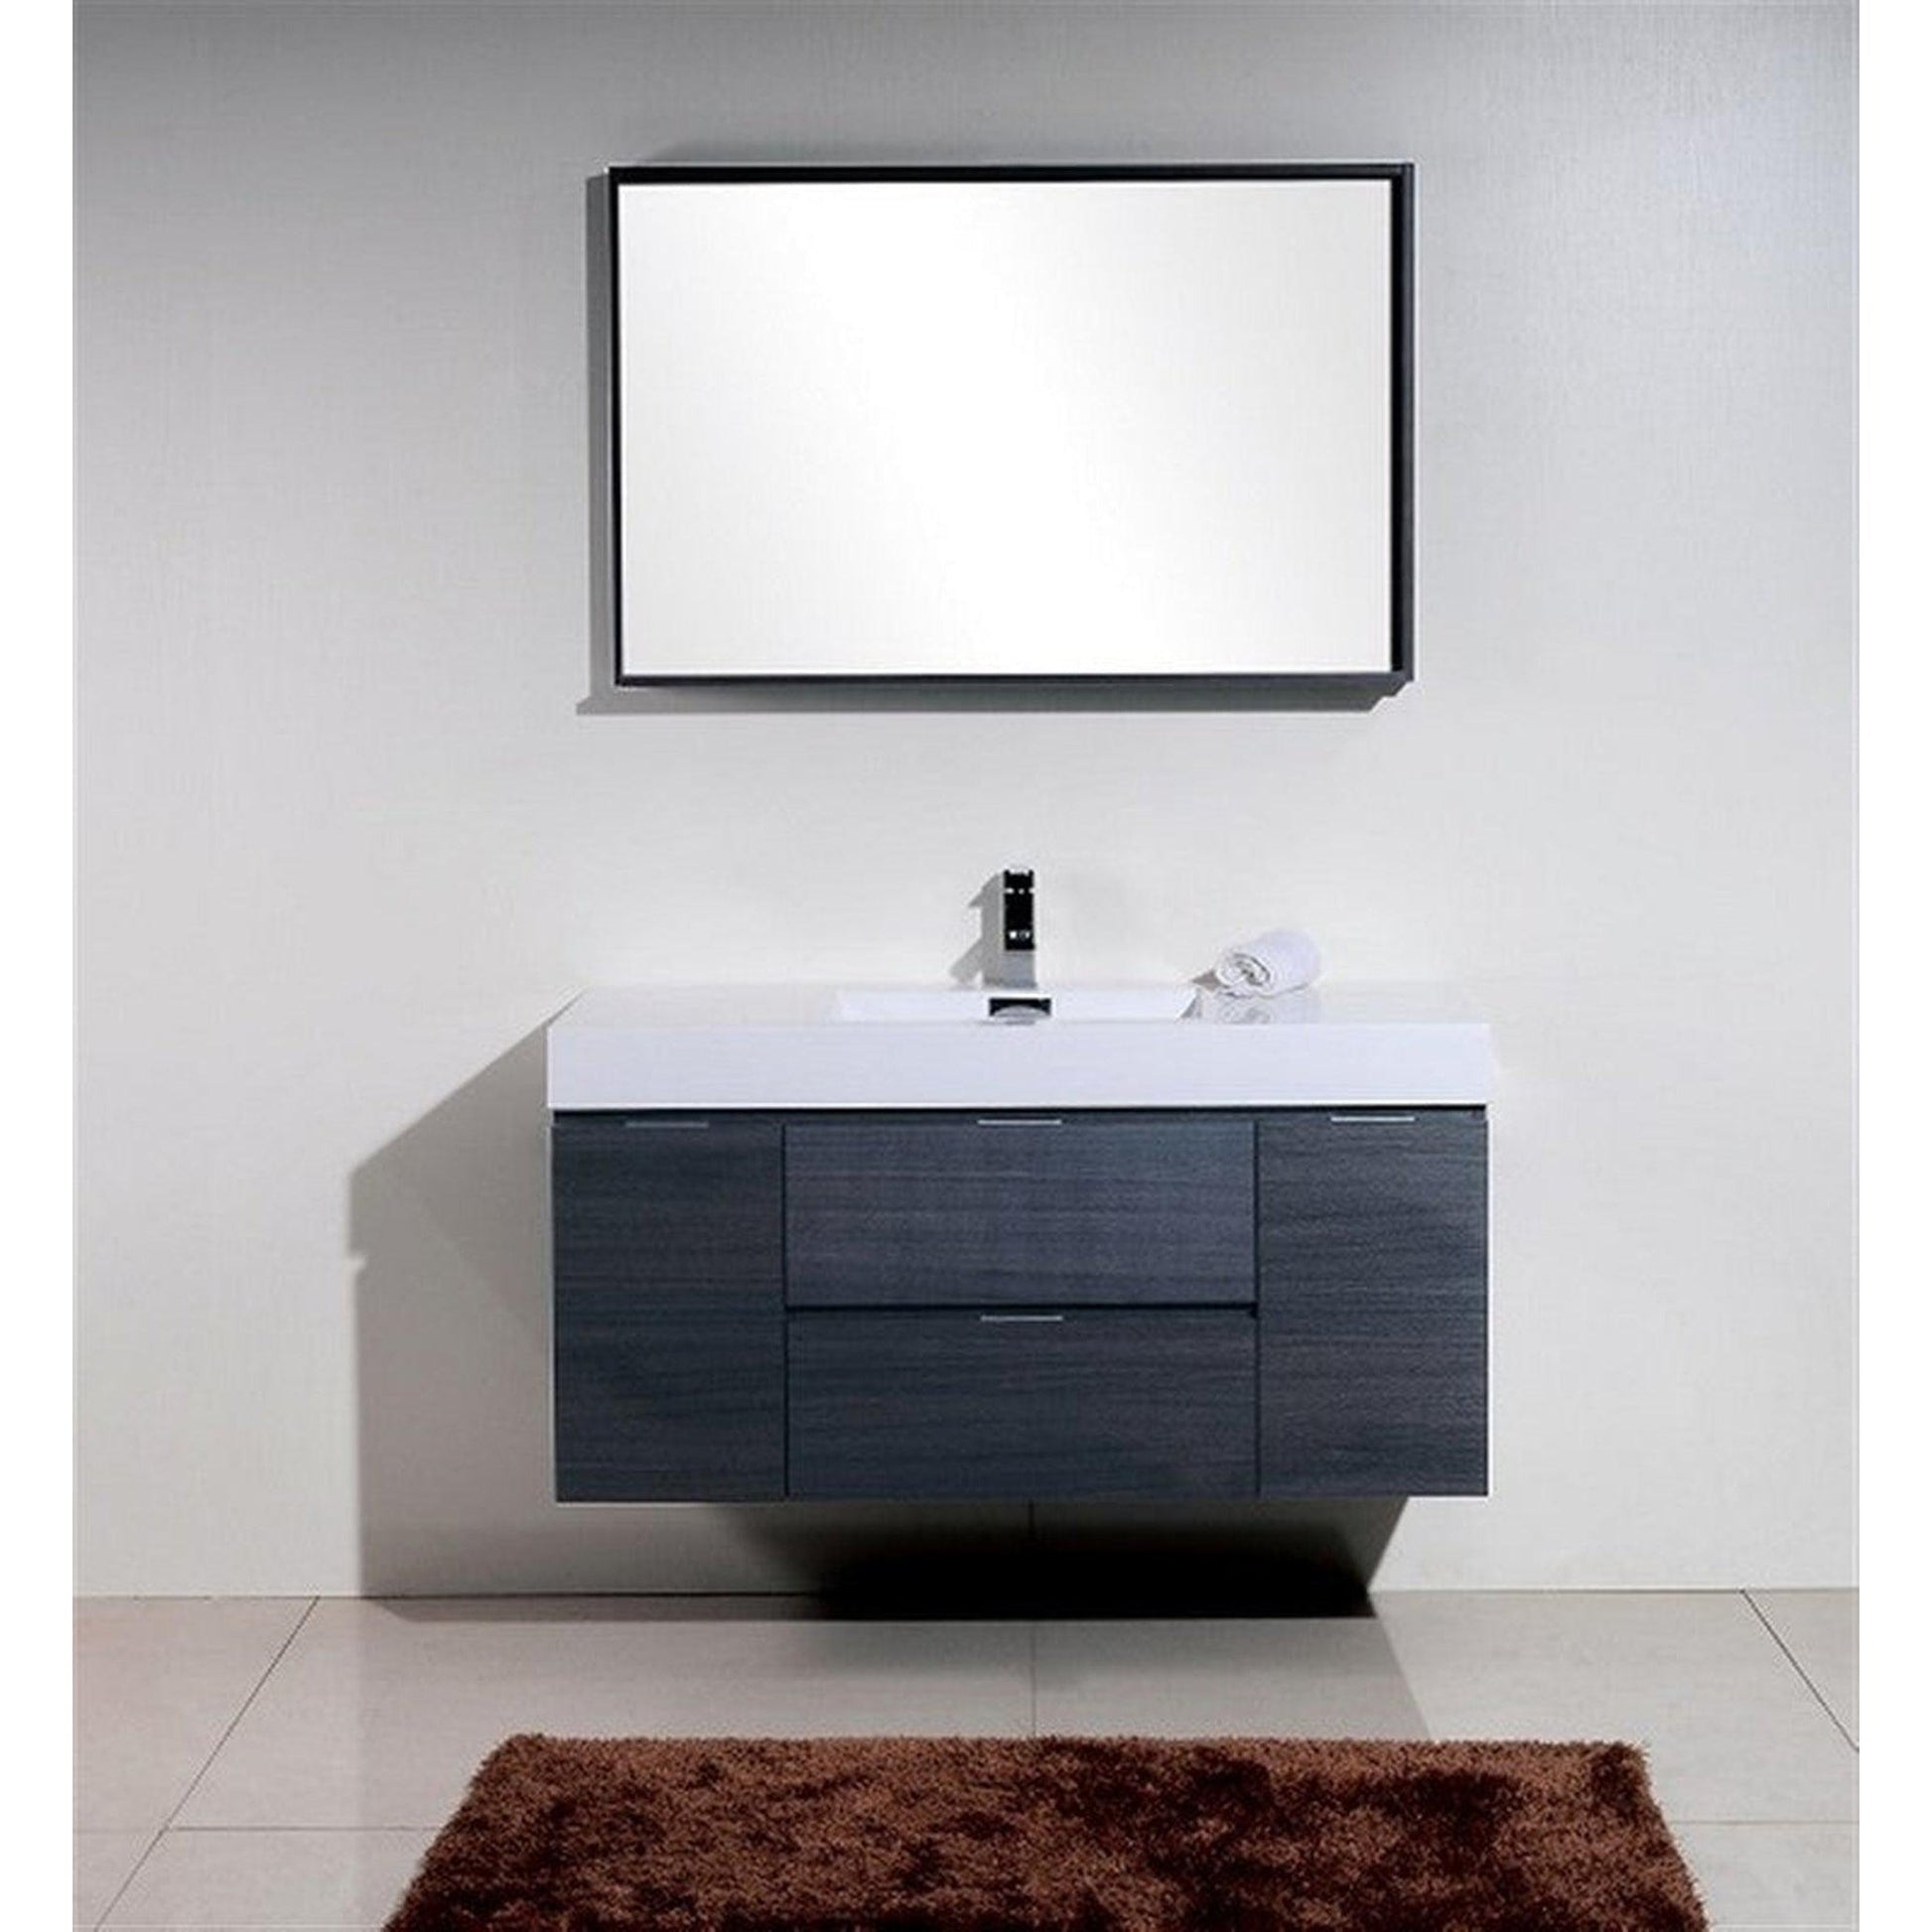 KubeBath Bliss 48" Gray Oak Wall-Mounted Modern Bathroom Vanity With Single Integrated Acrylic Sink With Overflow and 44" Gray Oak Framed Mirror With Shelf